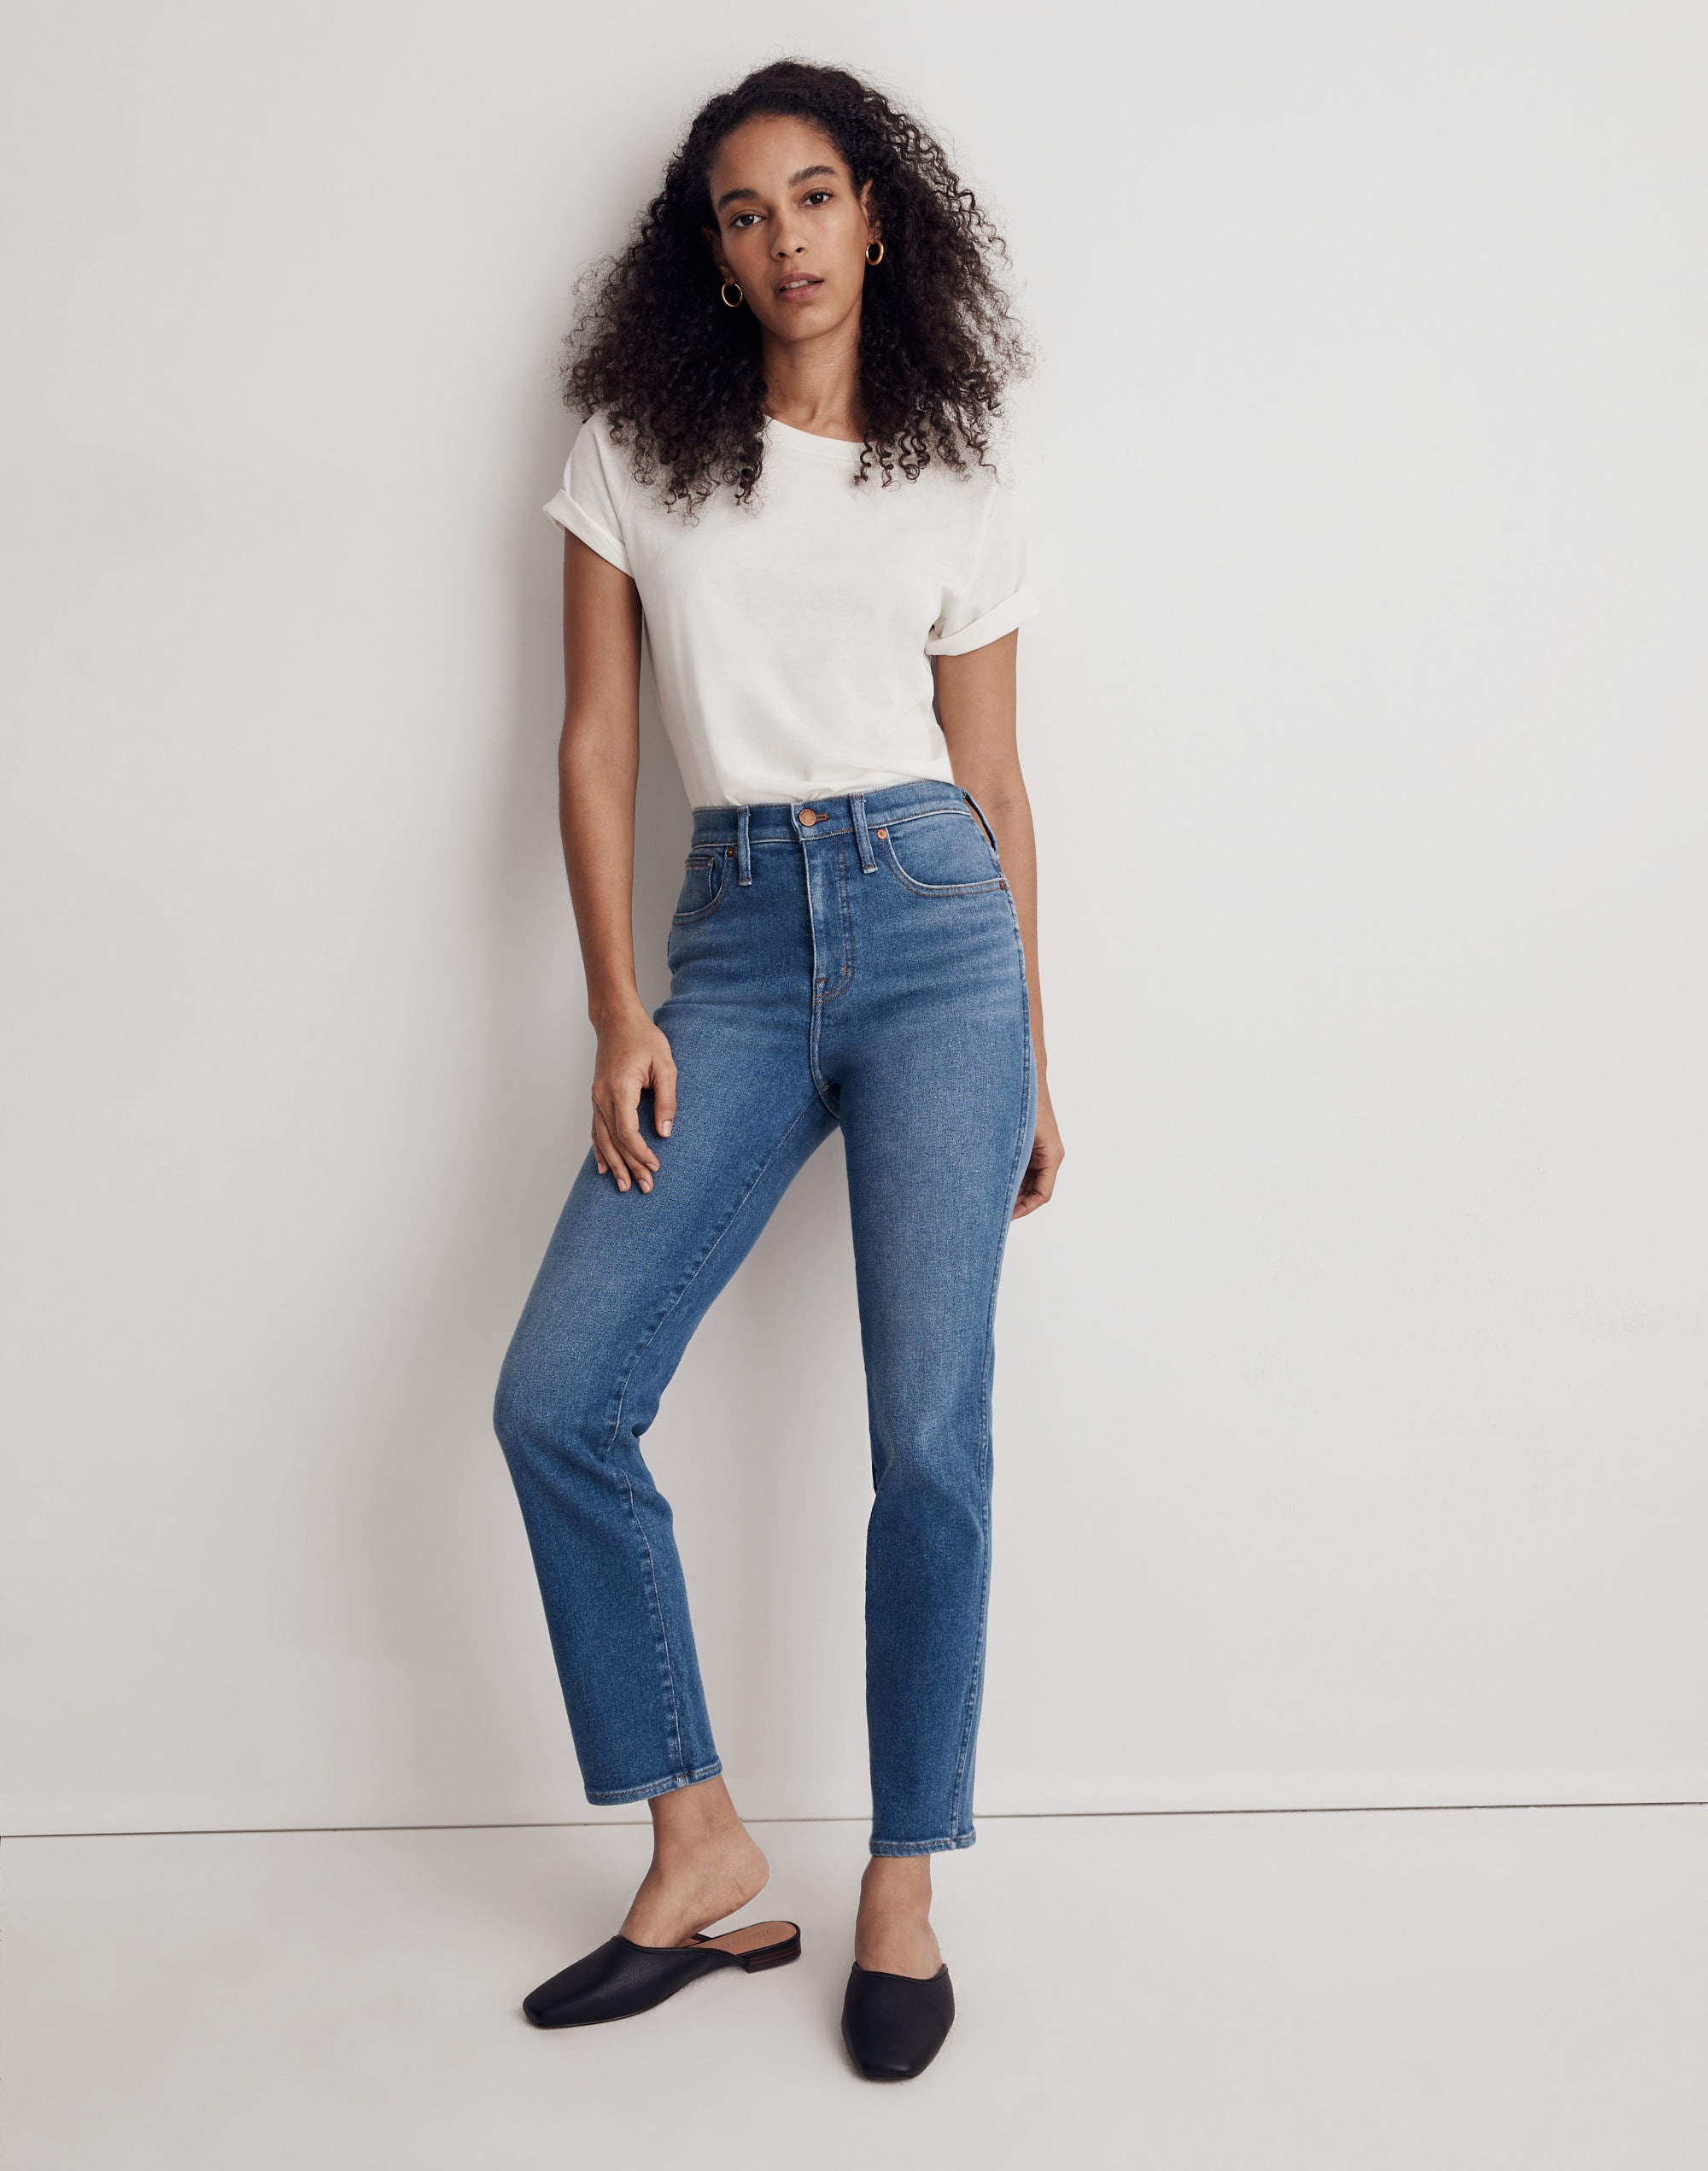 Madewell Kick Out Crop Mid-Rise Jeans: Details + Styling Tips - The Mom Edit